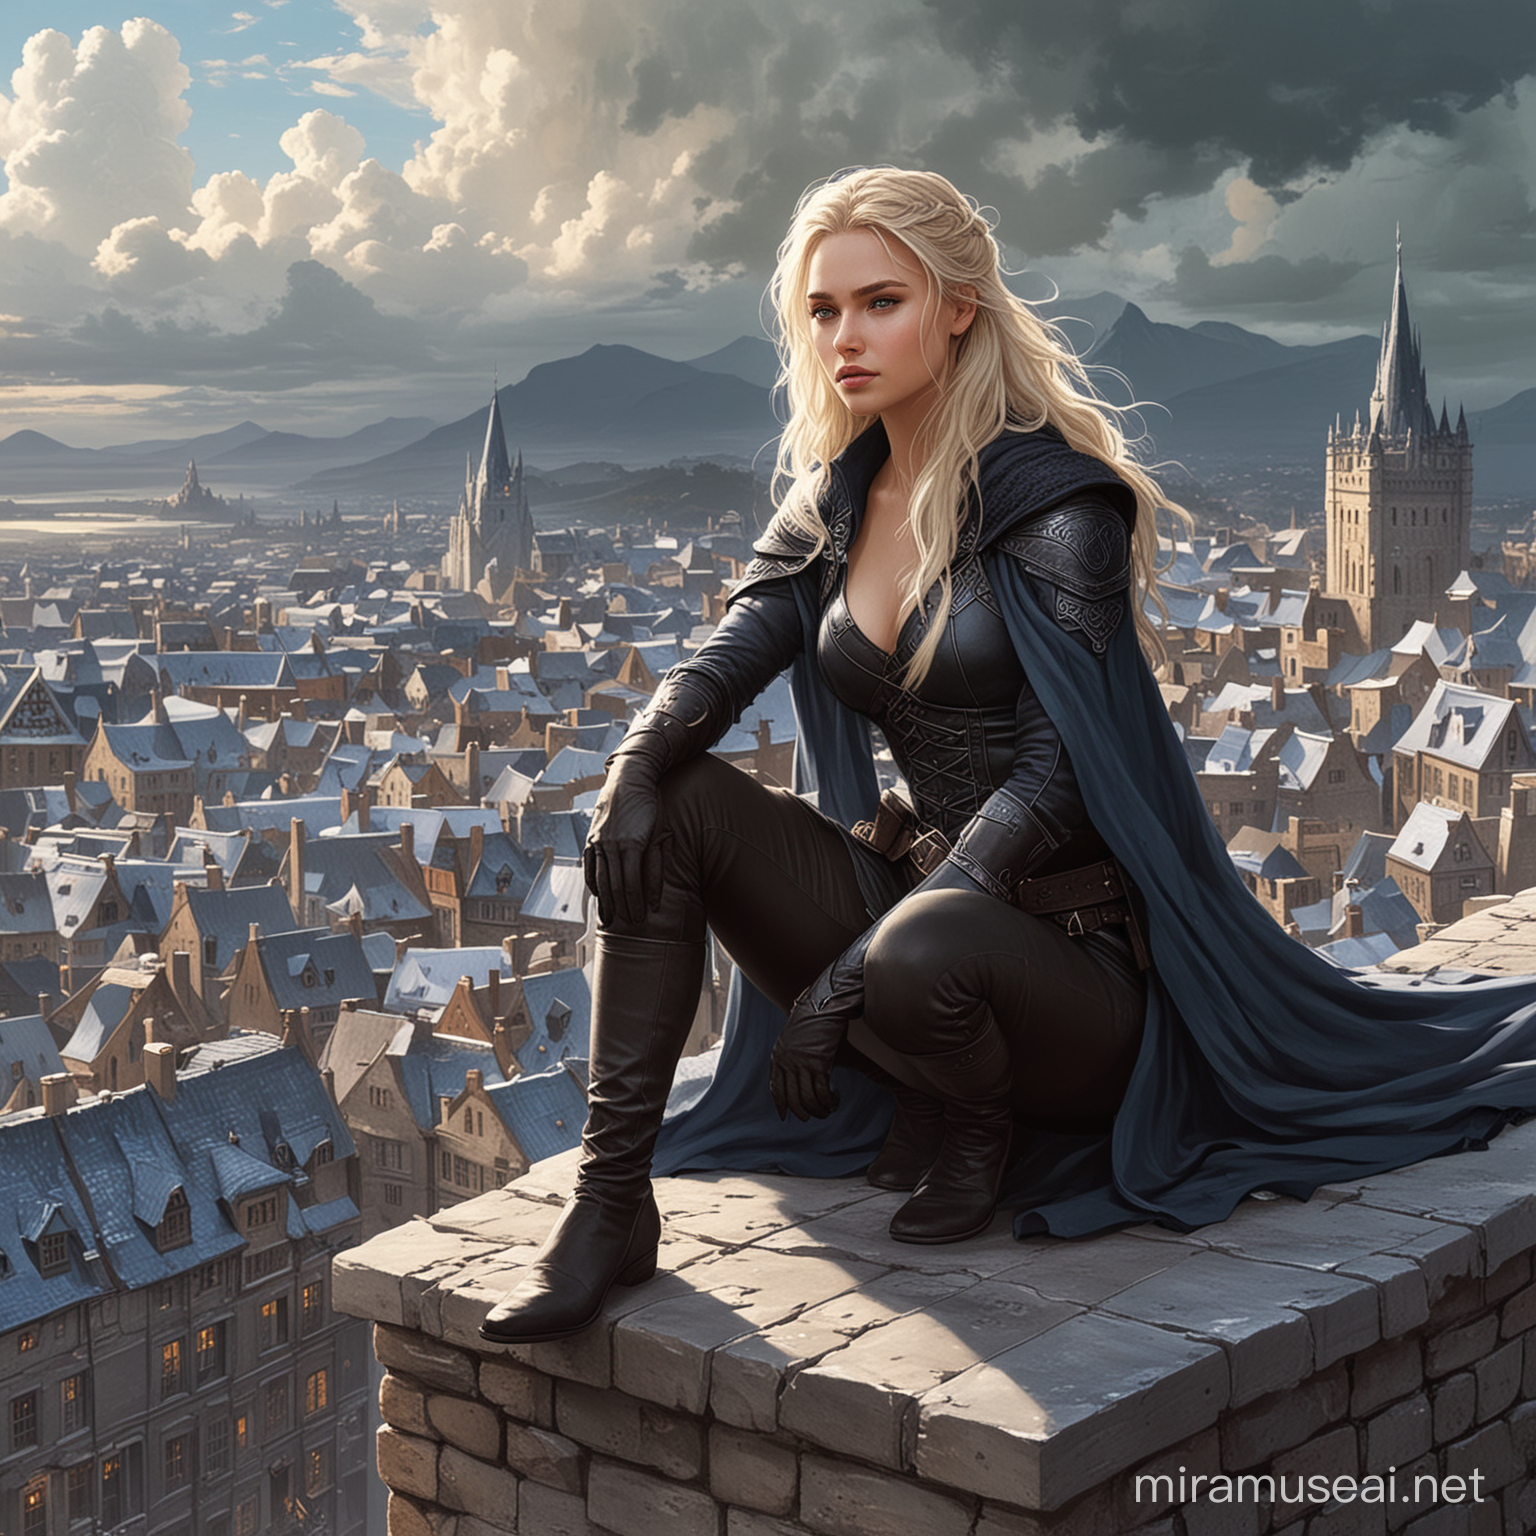 Celaena Sardothien in the city of Rifthold From Throne of glass series by Sarah J Maas. She should be crouching like an assassin on top of the city’s houses